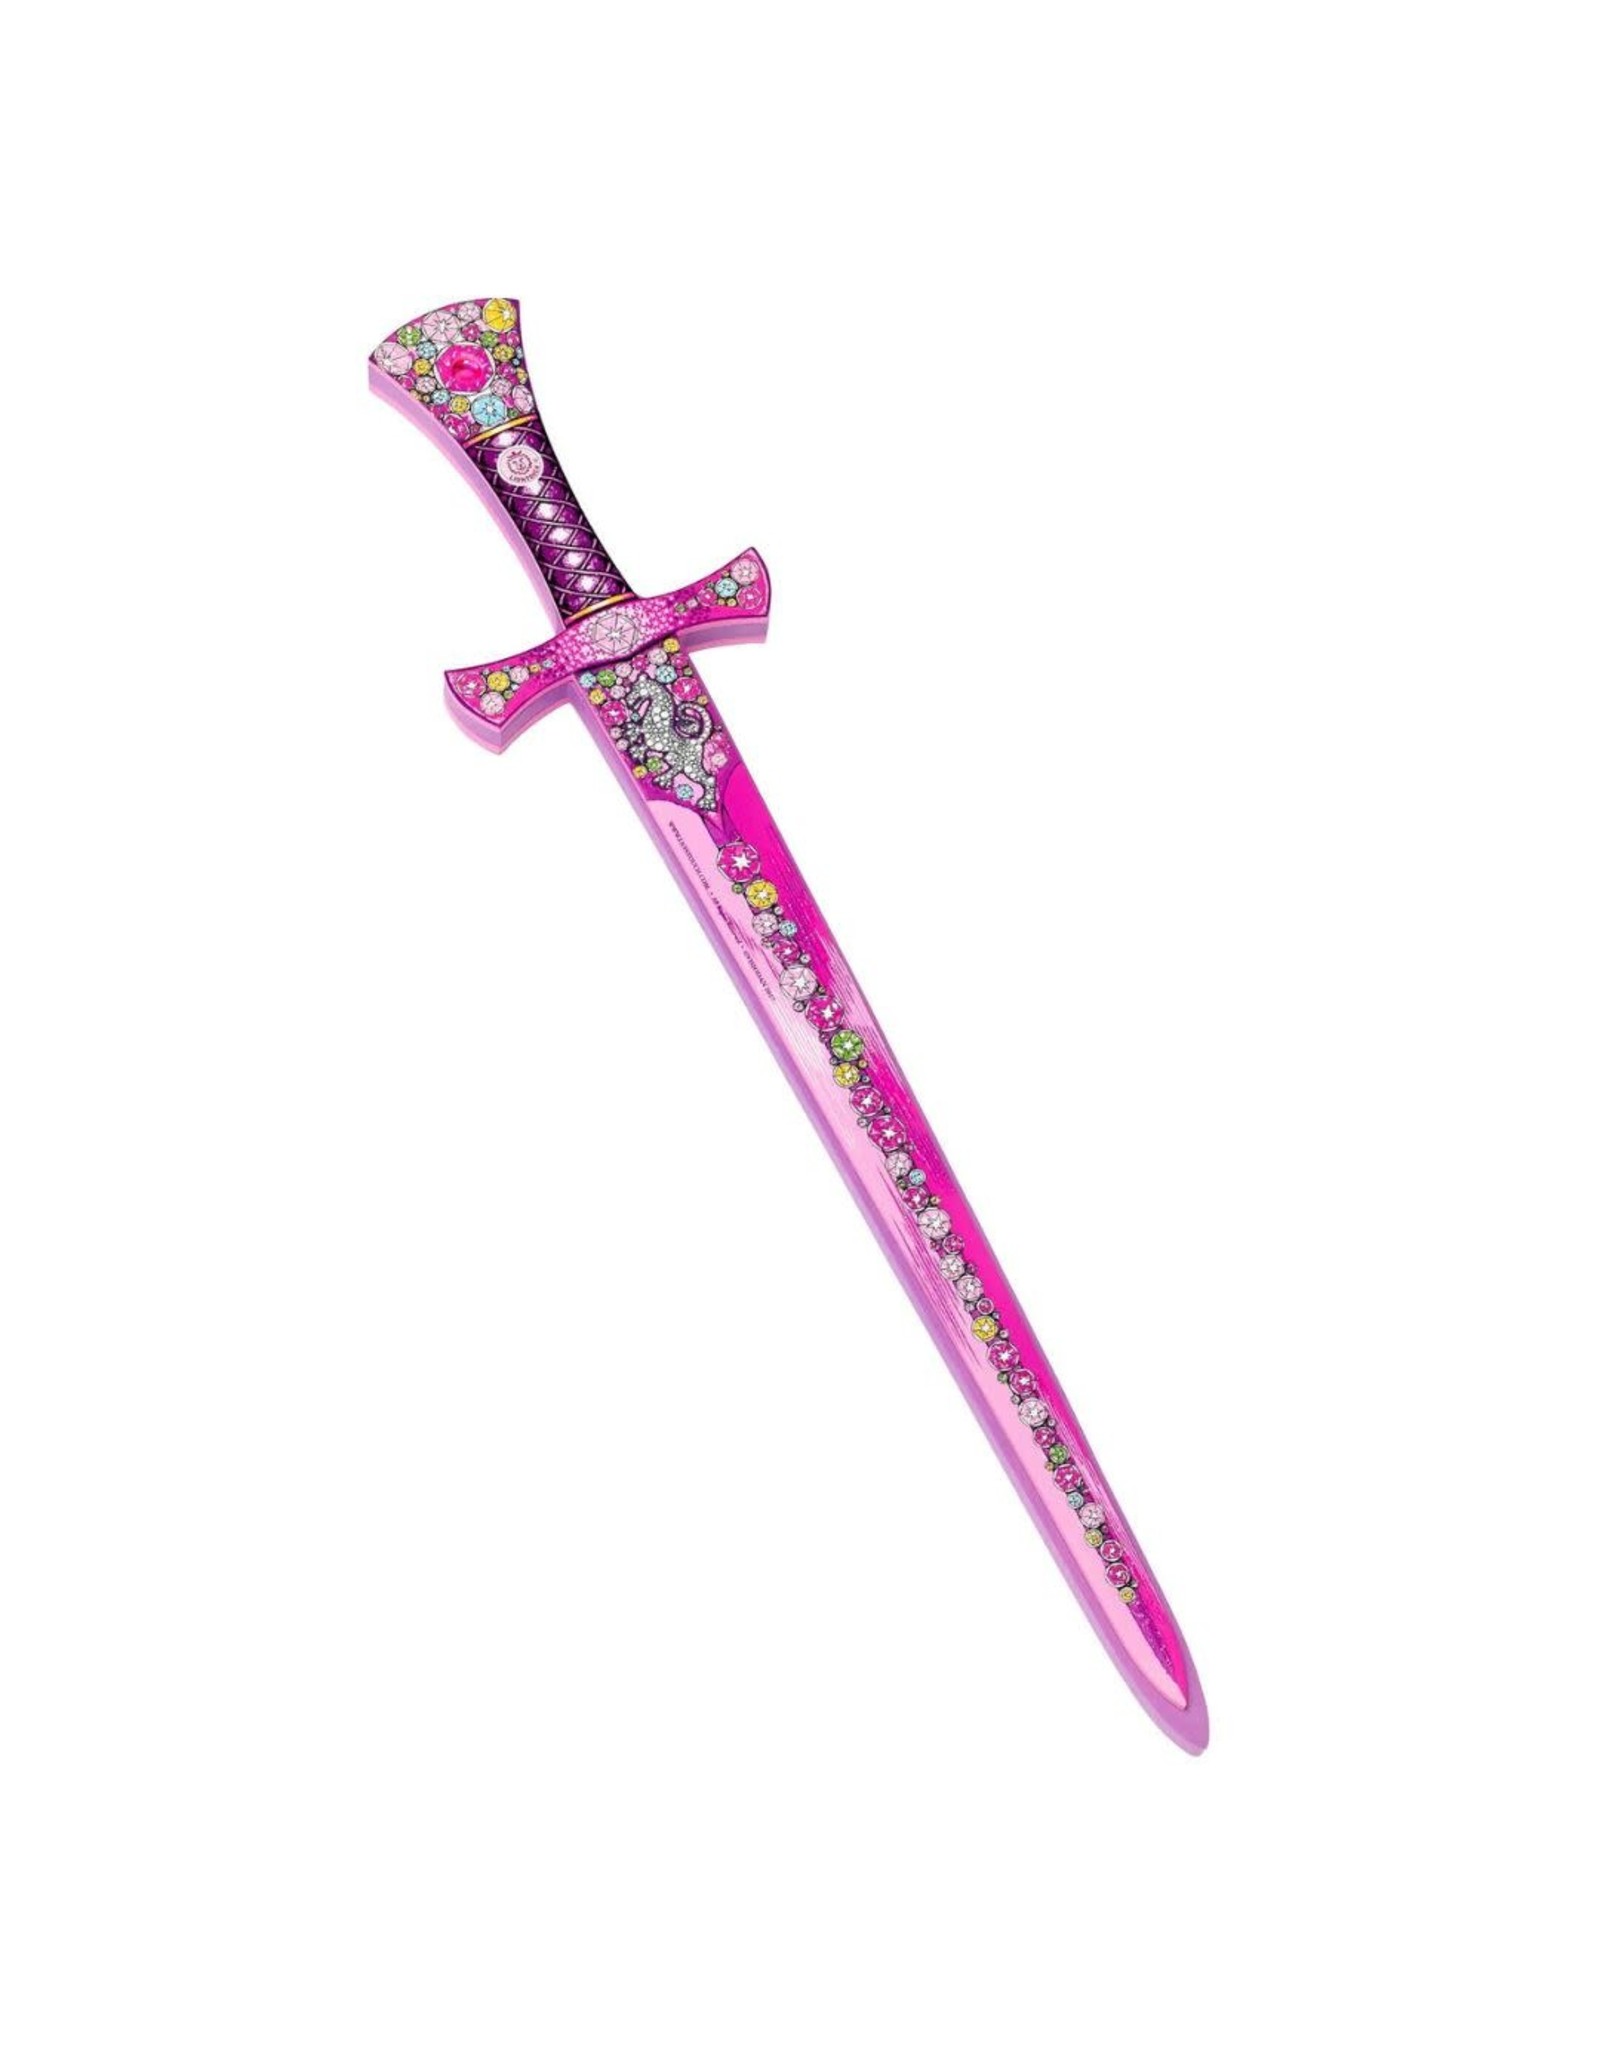 Lion Touch Crystal Princess Sword